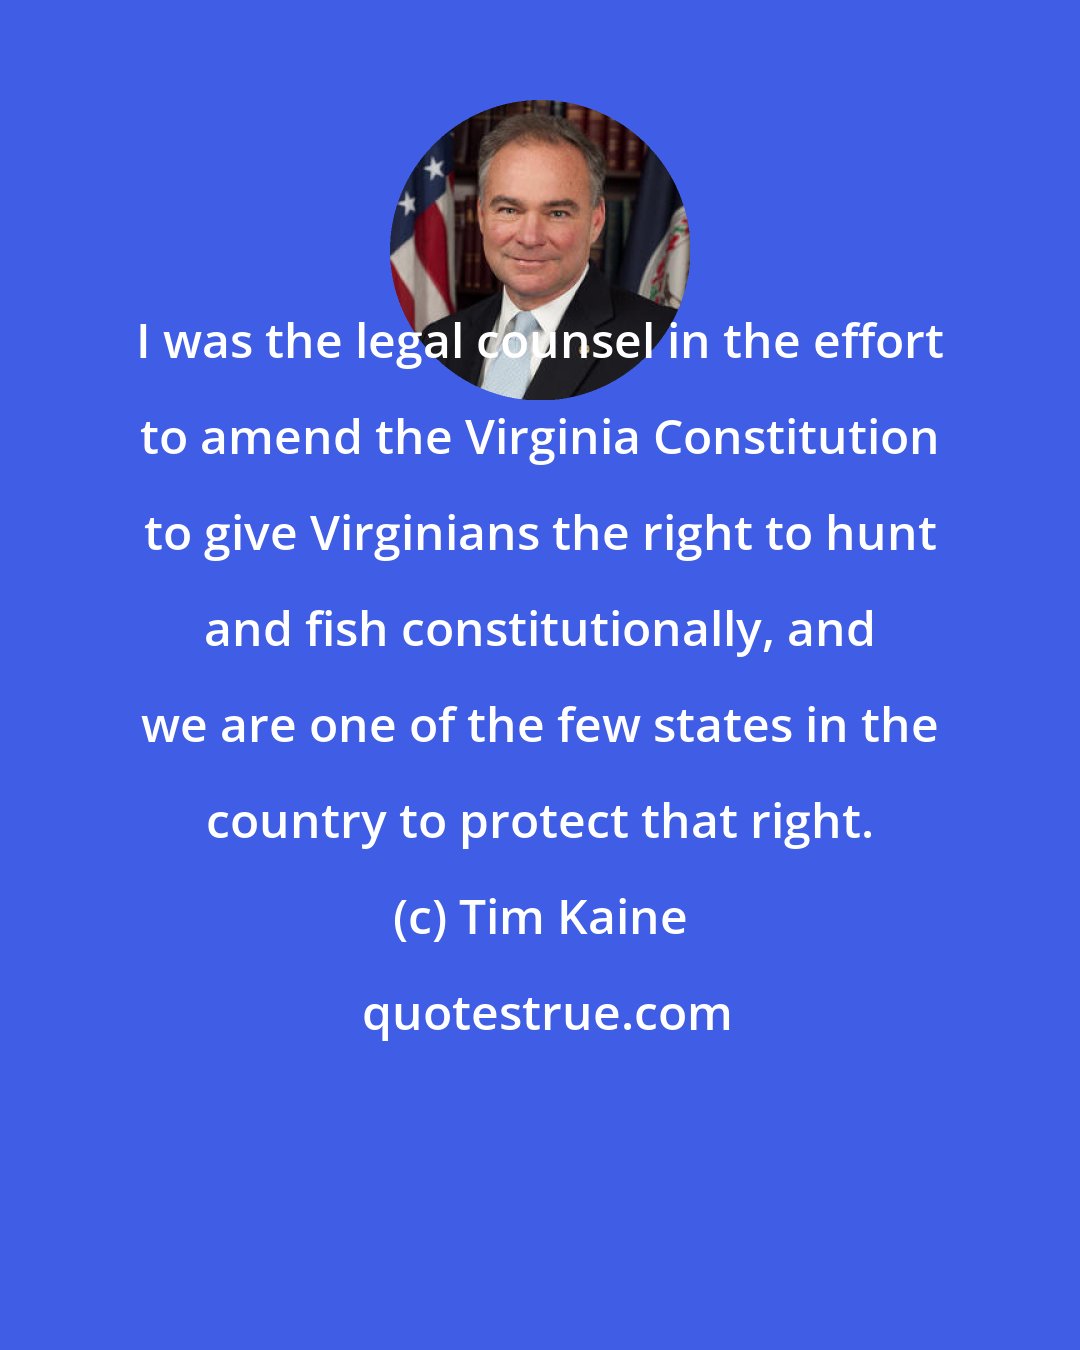 Tim Kaine: I was the legal counsel in the effort to amend the Virginia Constitution to give Virginians the right to hunt and fish constitutionally, and we are one of the few states in the country to protect that right.